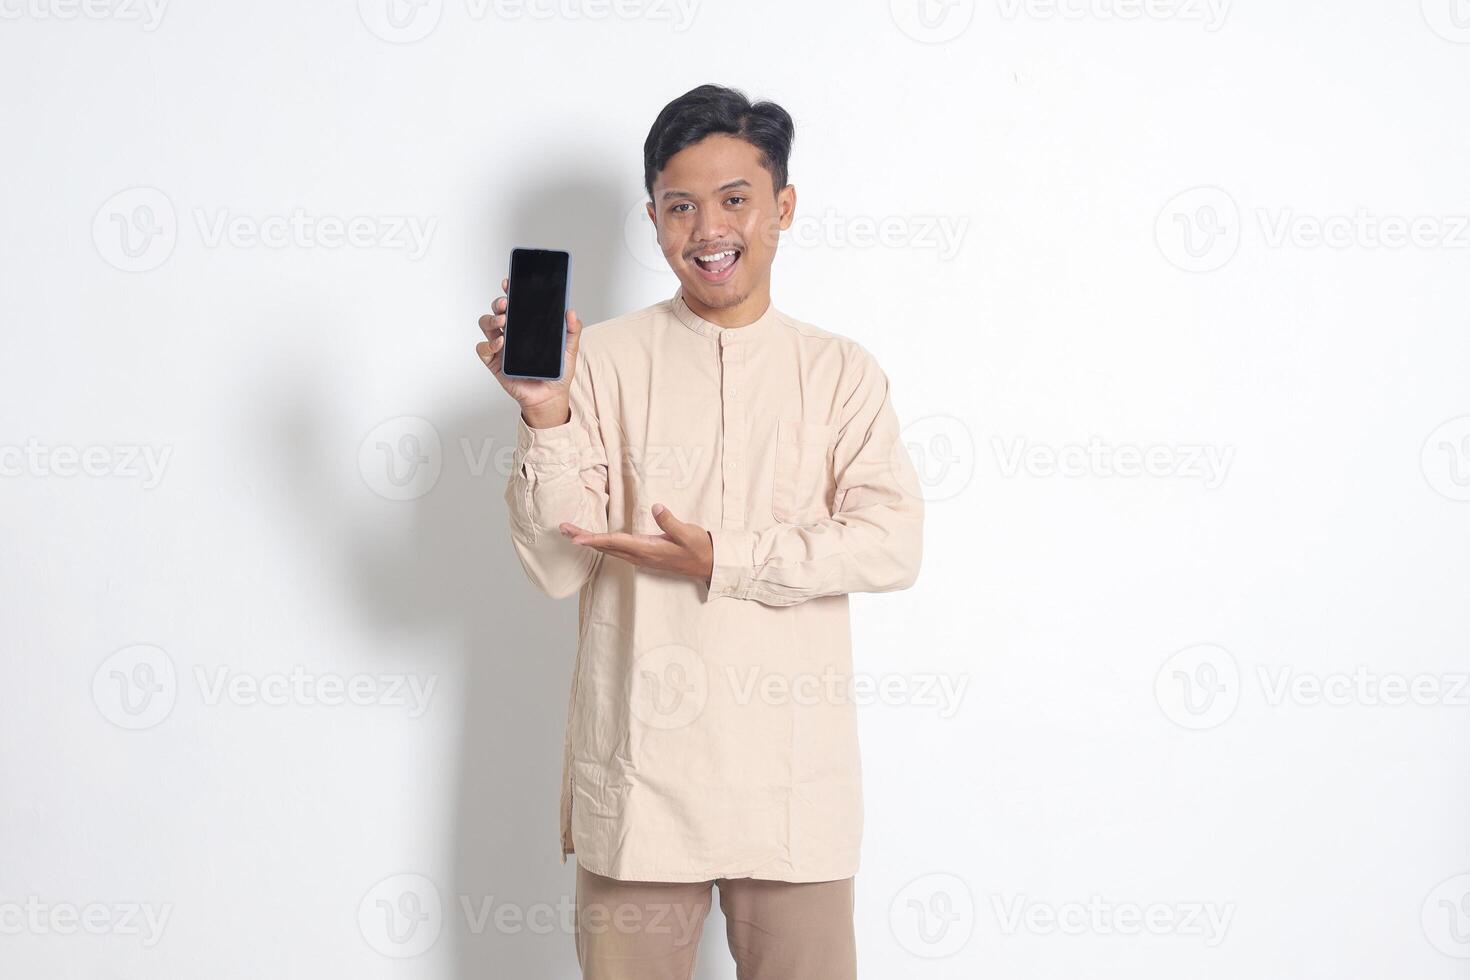 Portrait of young excited Asian muslim man in koko shirt showing blank screen mobile phone mockup while pointing and presenting product. Social media concept. Isolated image on white background photo